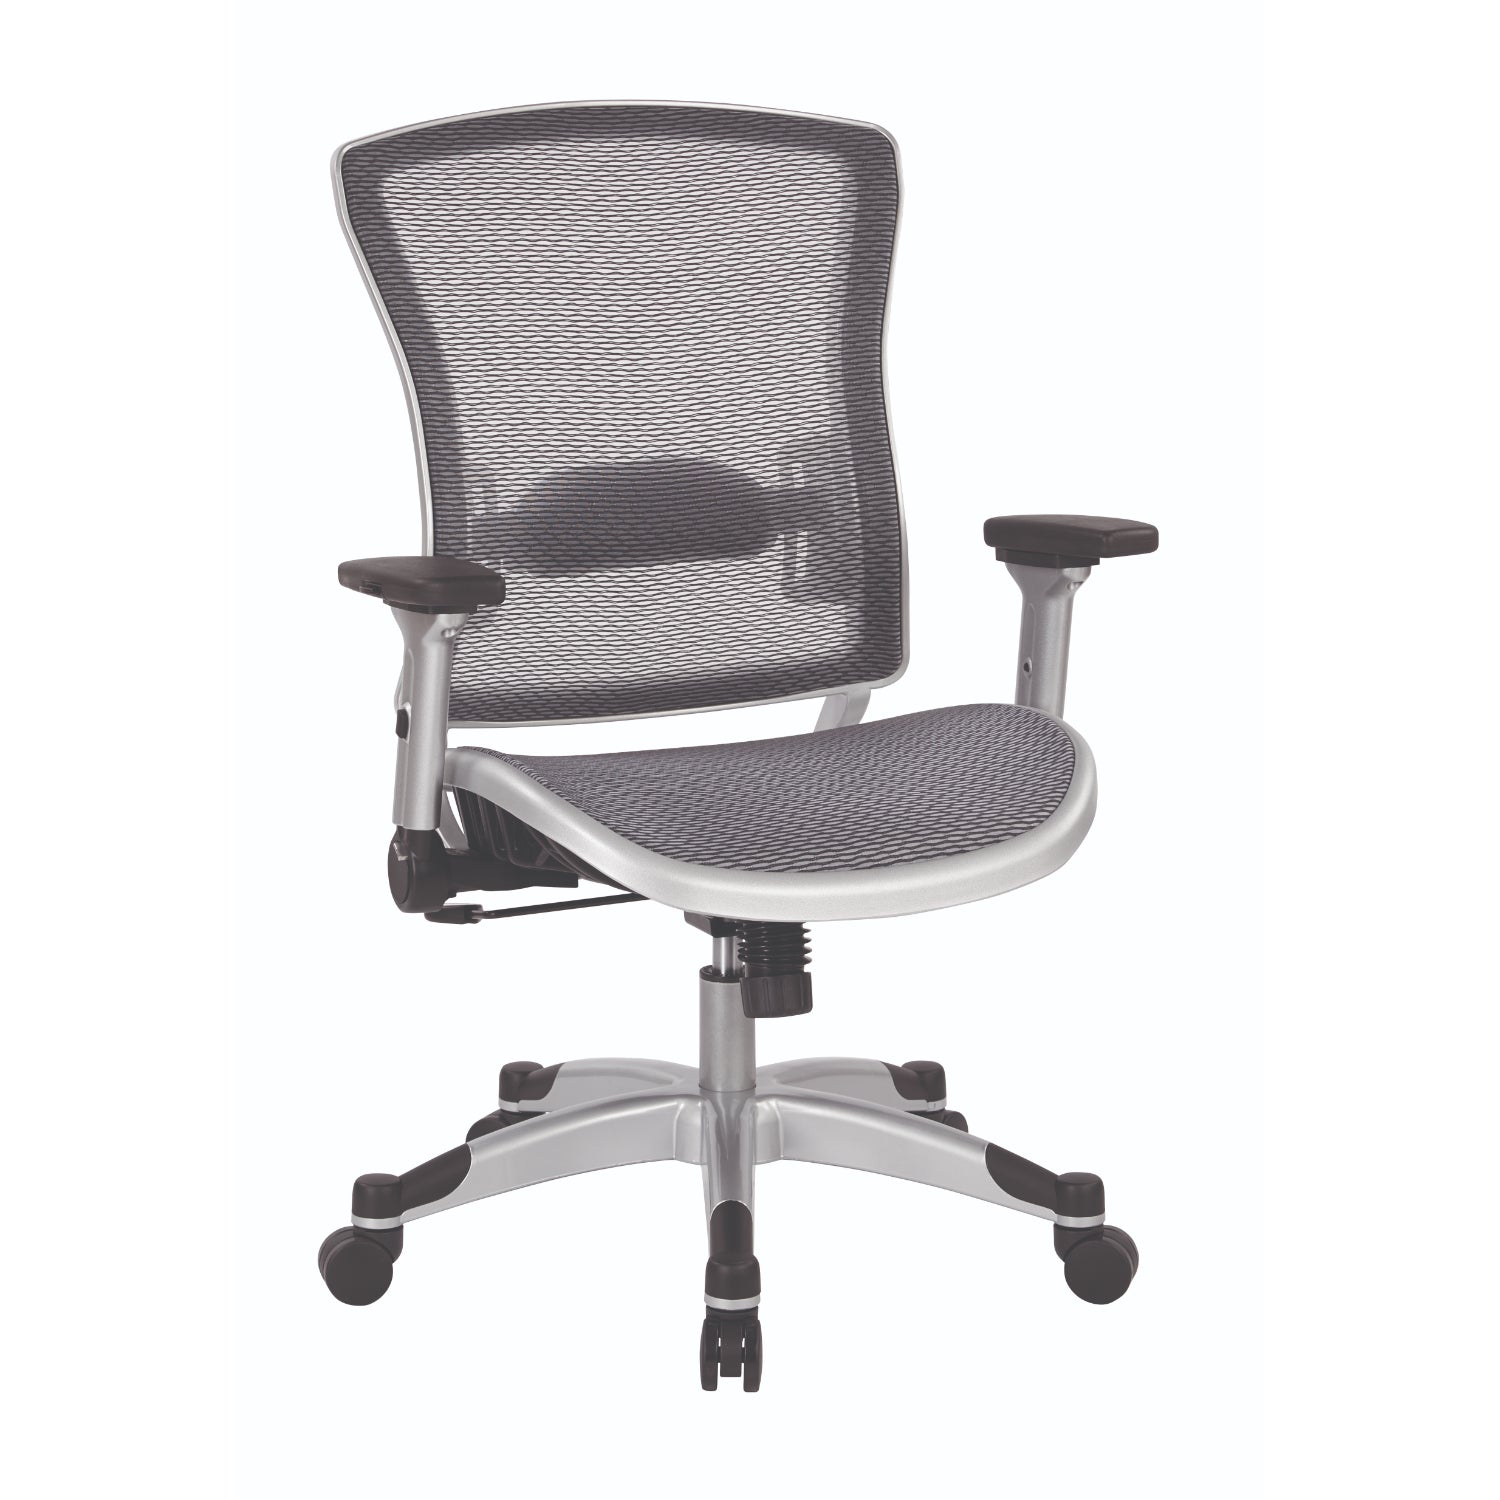 Professional Light AirGrid® Seat and Back Executive Chair with Platinum Finish Flip Arms and Platinum Coated Base with Black End Caps